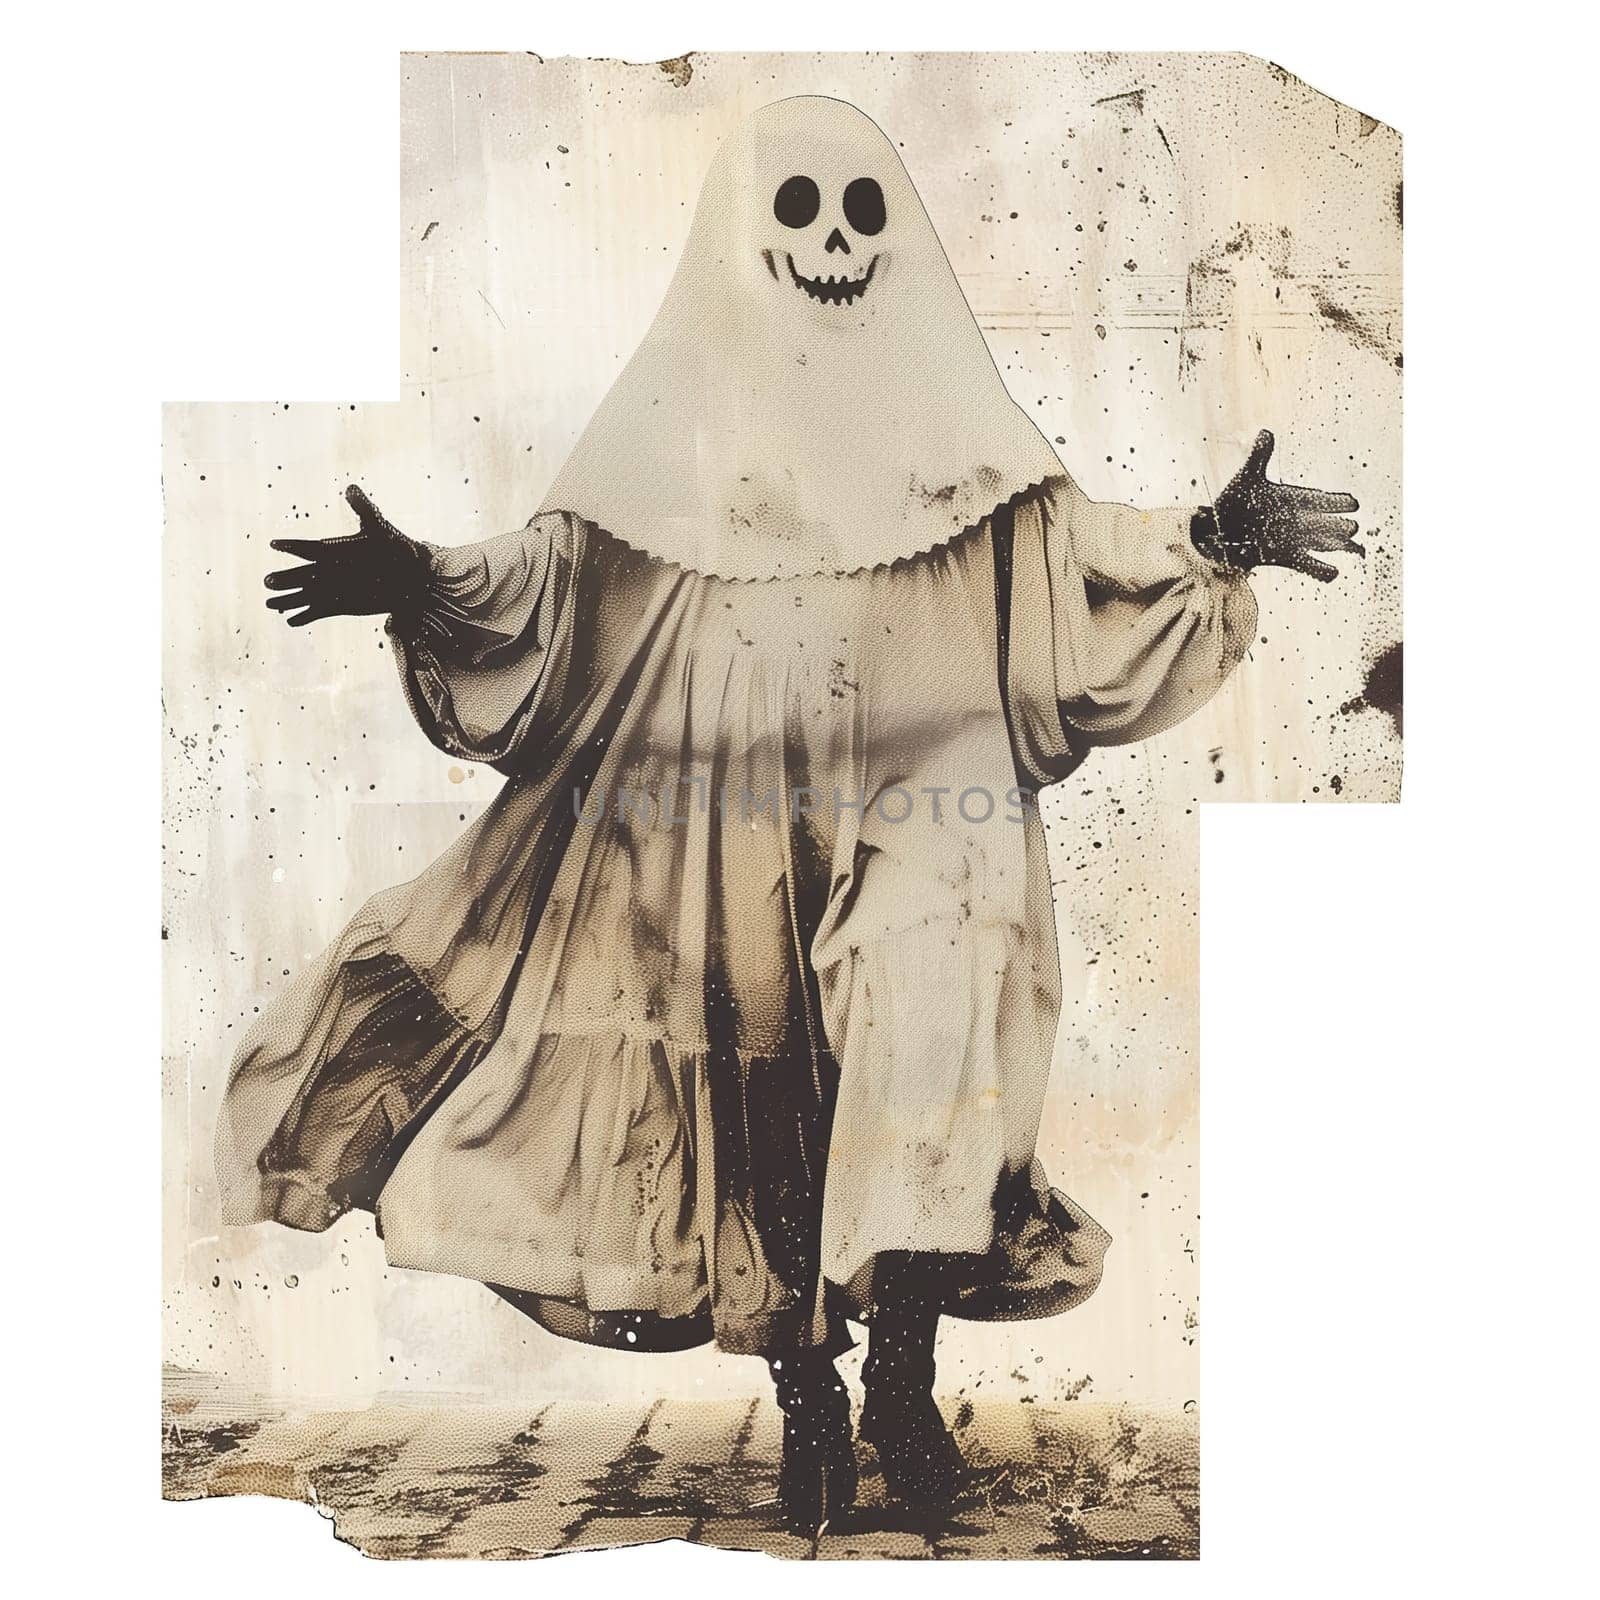 Monochrome vintage photo of halloween ghost cut out image by Dustick